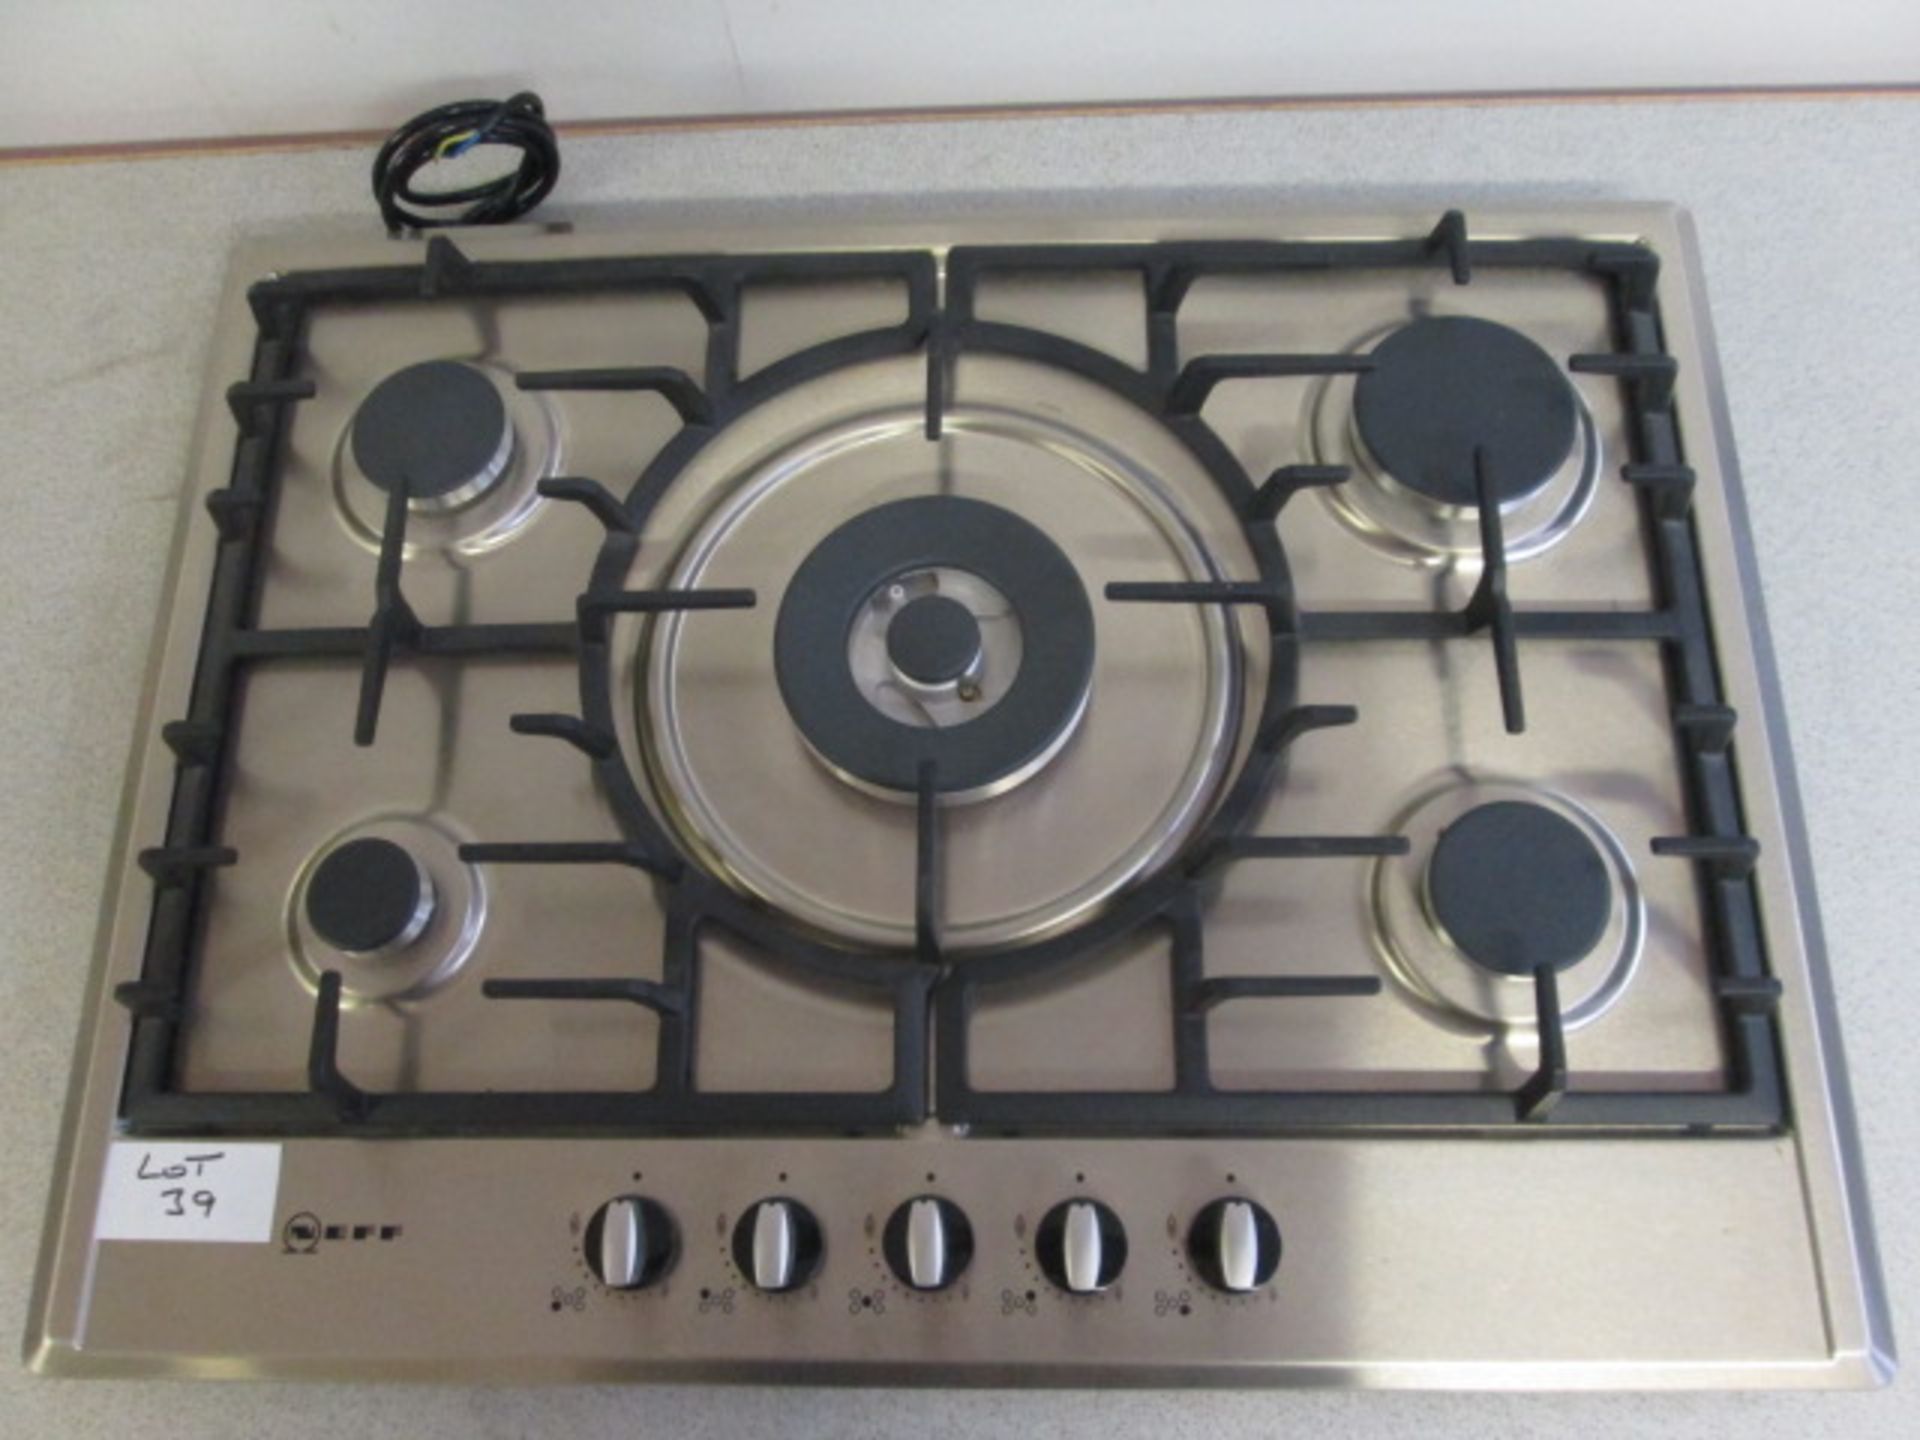 Neff 5 Ring Gas Hob in Brushed Steel. (As New/Ex Display) - Image 2 of 2